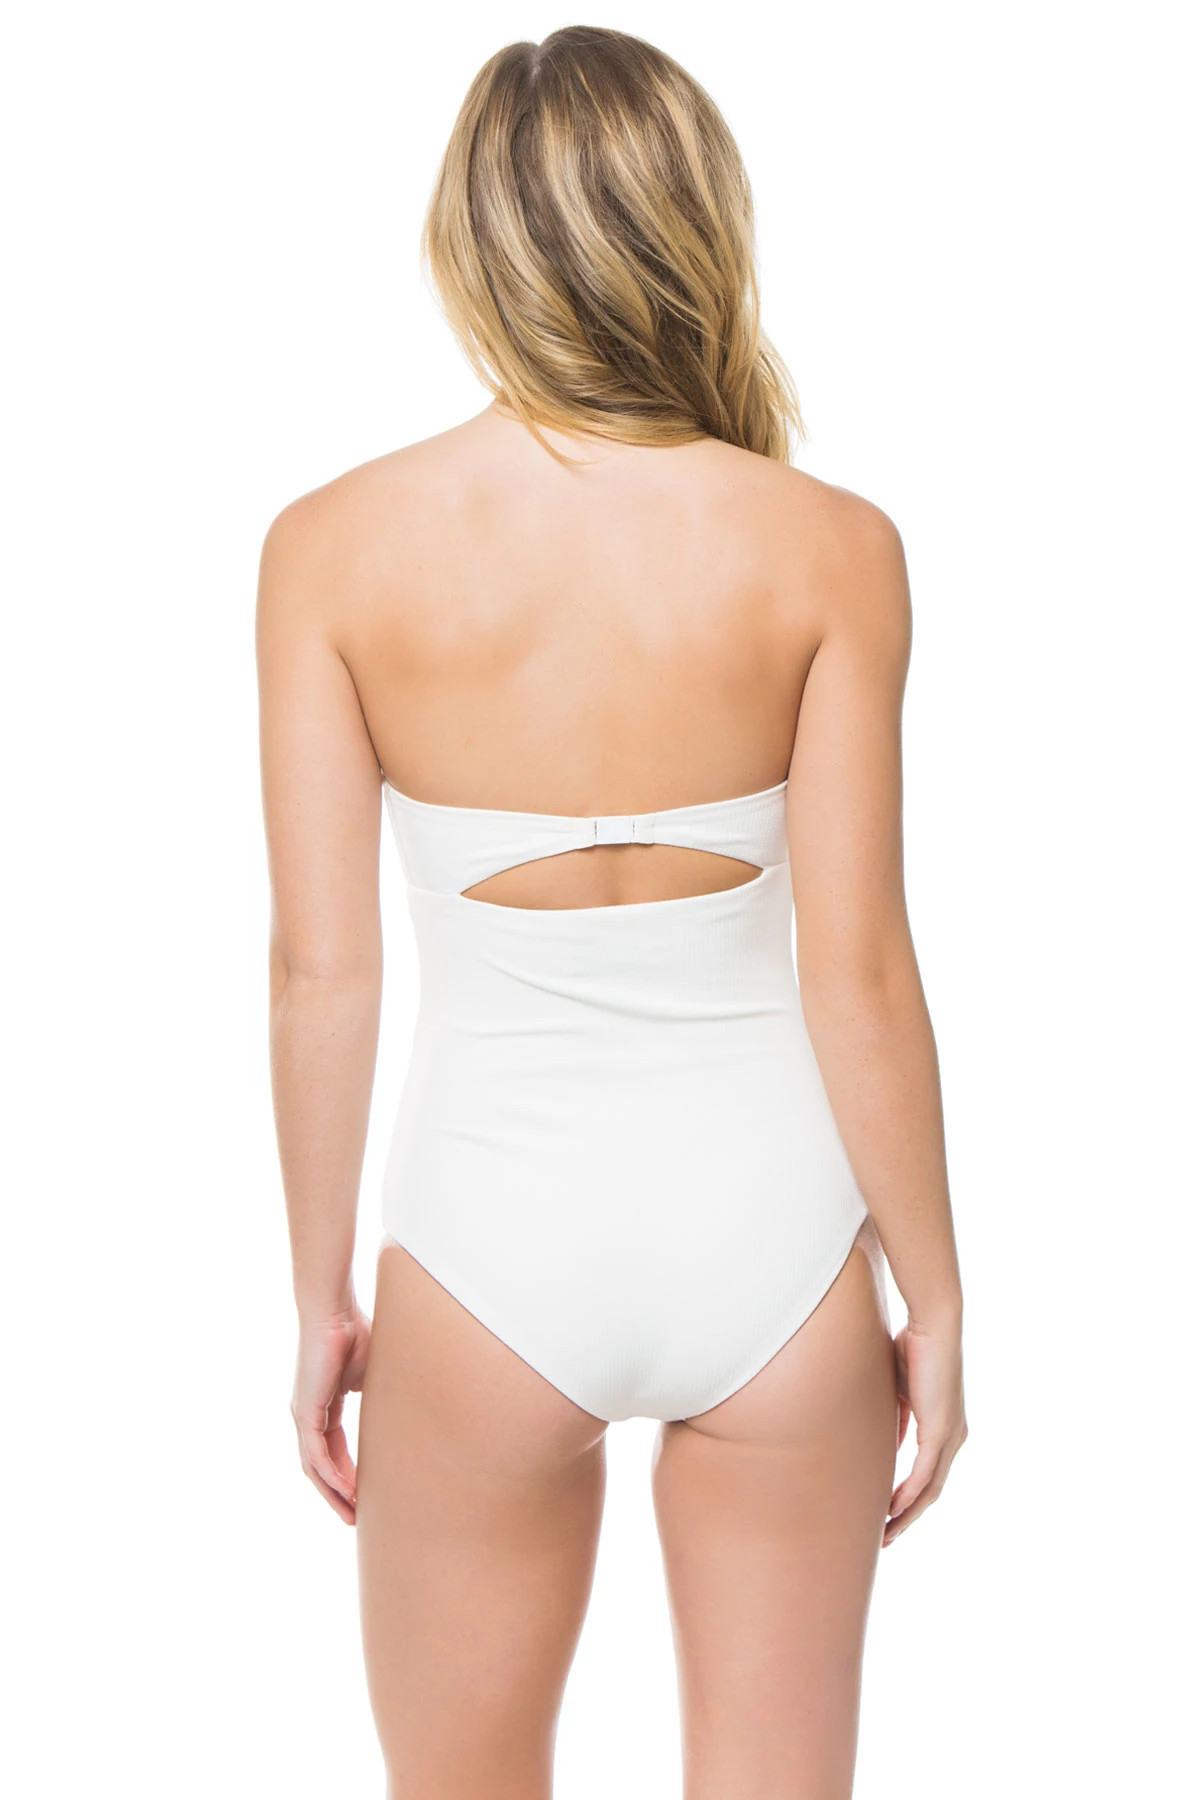 COCONUT Scallop Bandeau One Piece Swimsuit image number 2